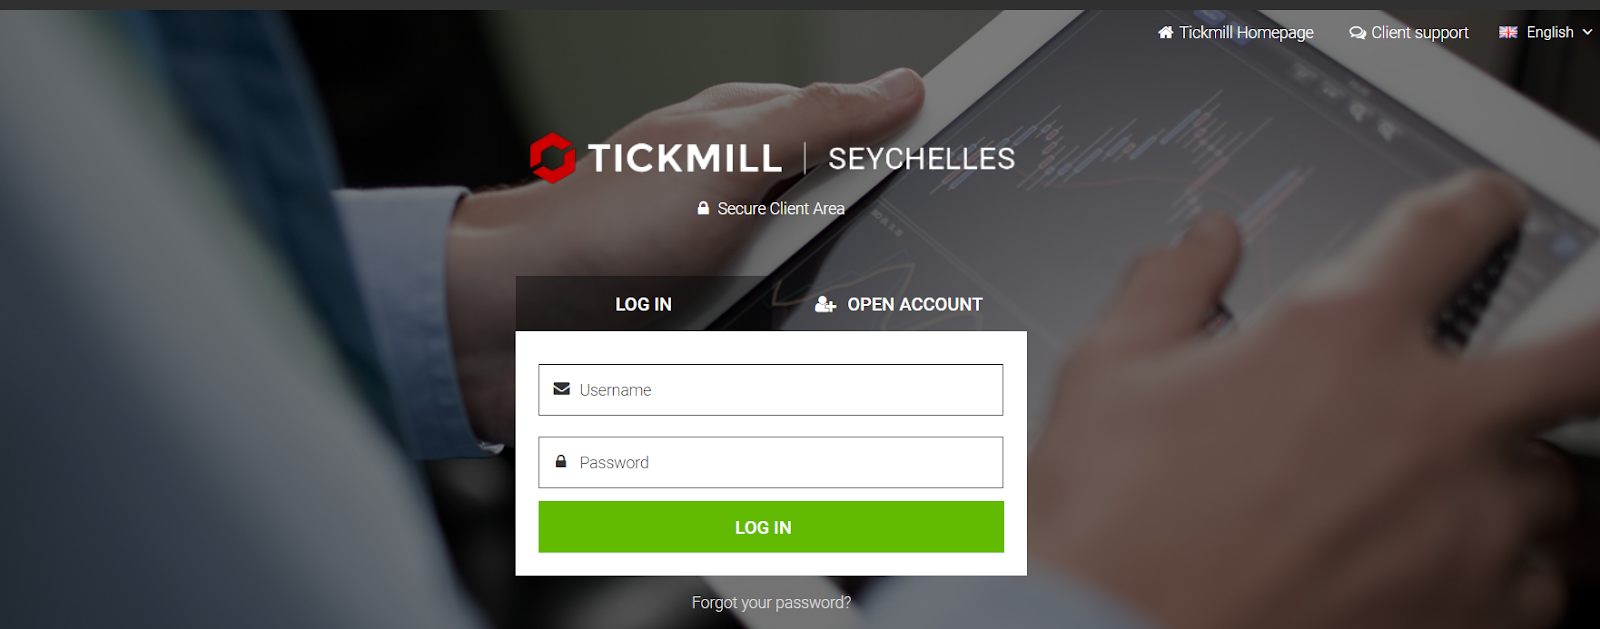 Funds Withdrawal in Tickmill - Log in